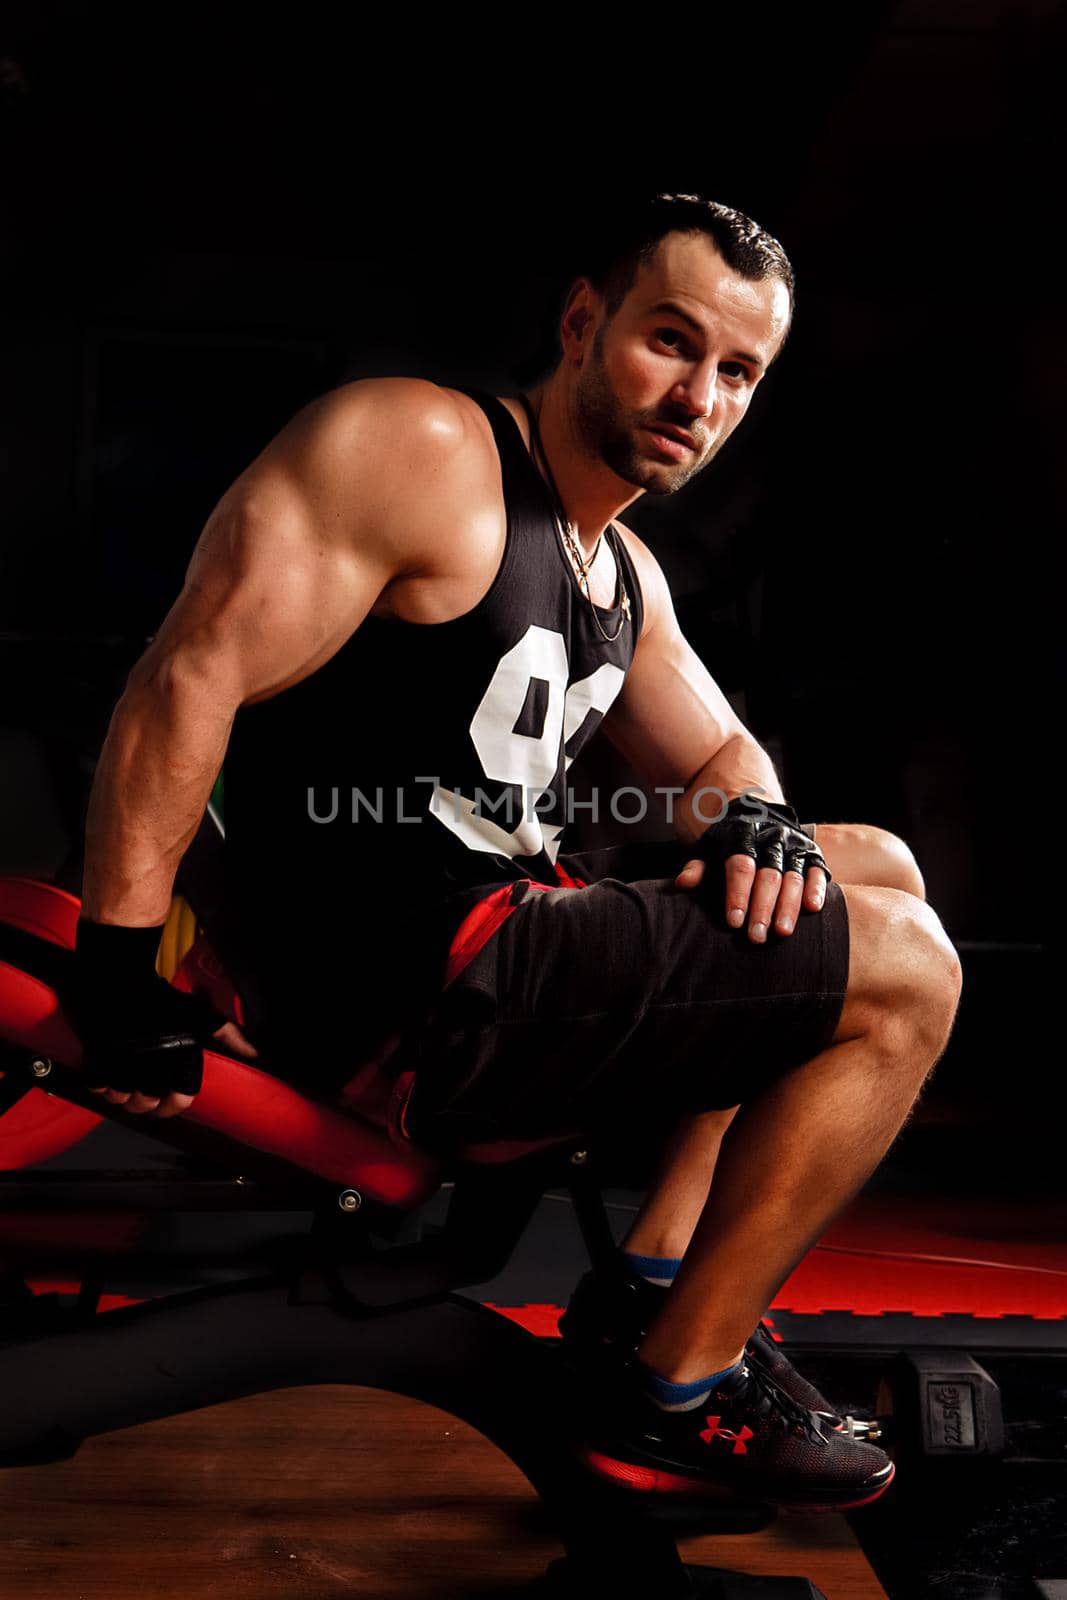 Close up portrait of a fit young man working out in sports simulators by studiodav